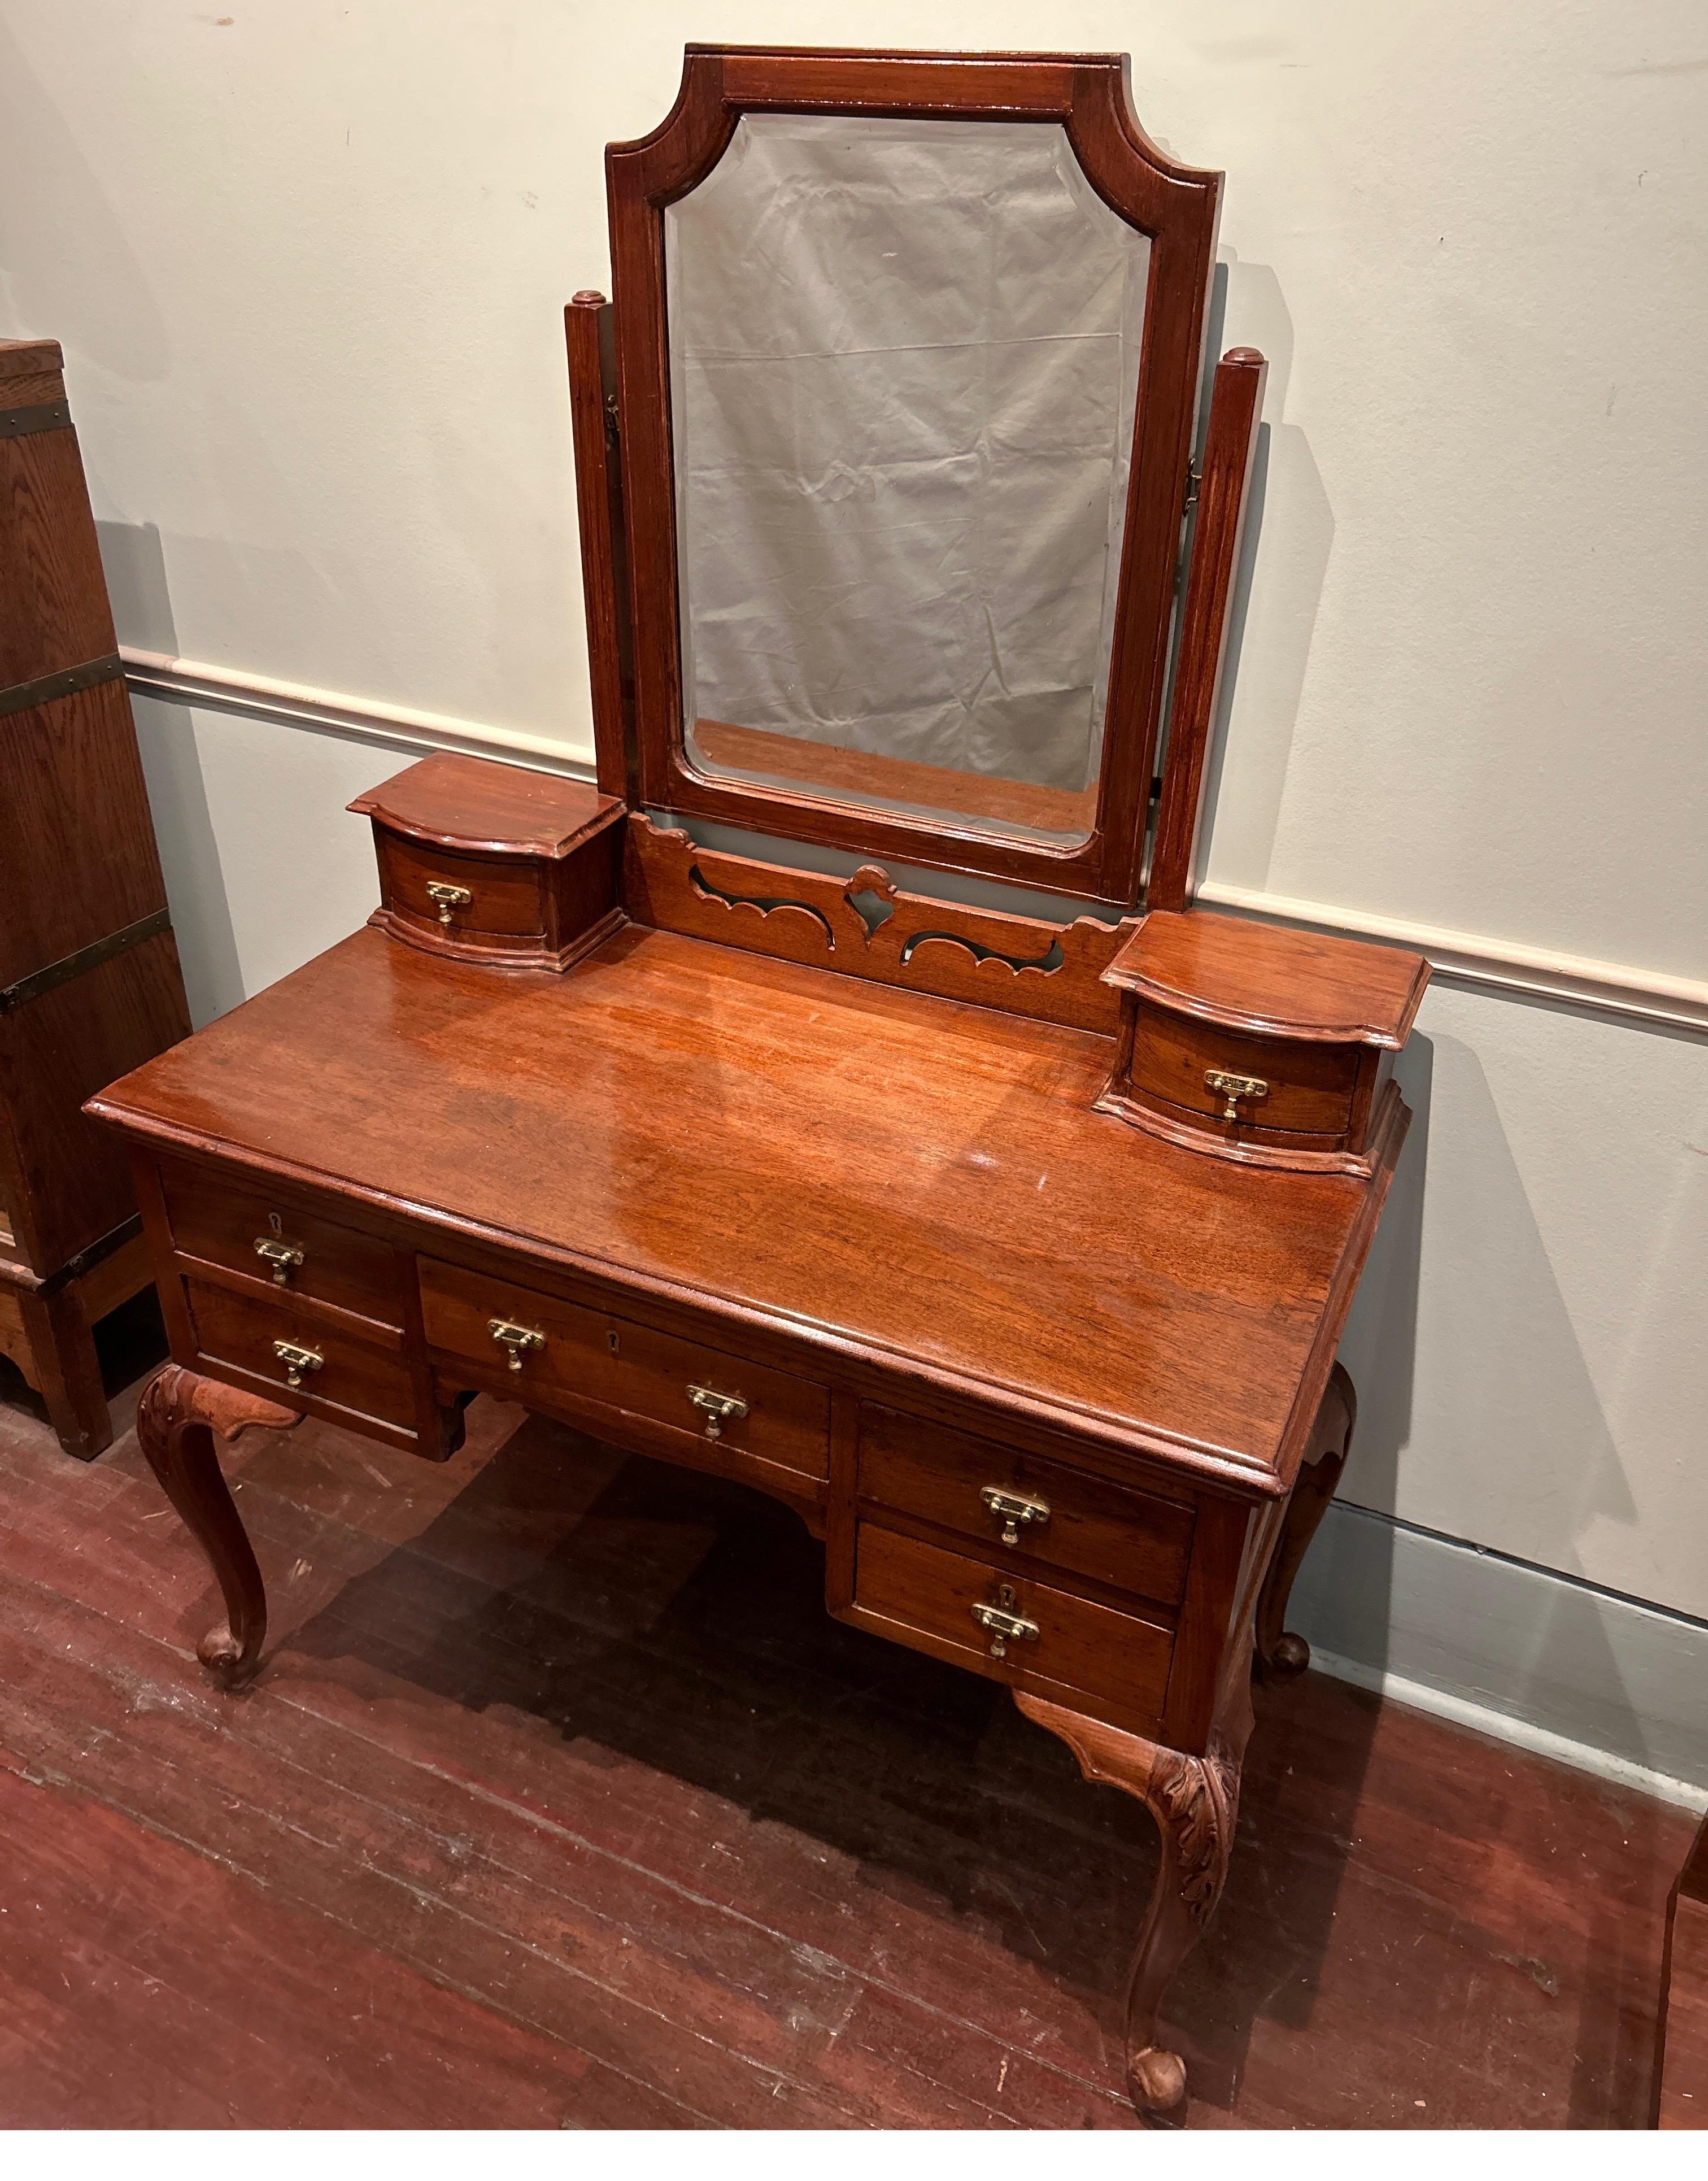 British Indian Ocean Territory Art Nouveau Teak Hand Carved Vanity Cum Writing Table With Drawers & Brass Pulls For Sale